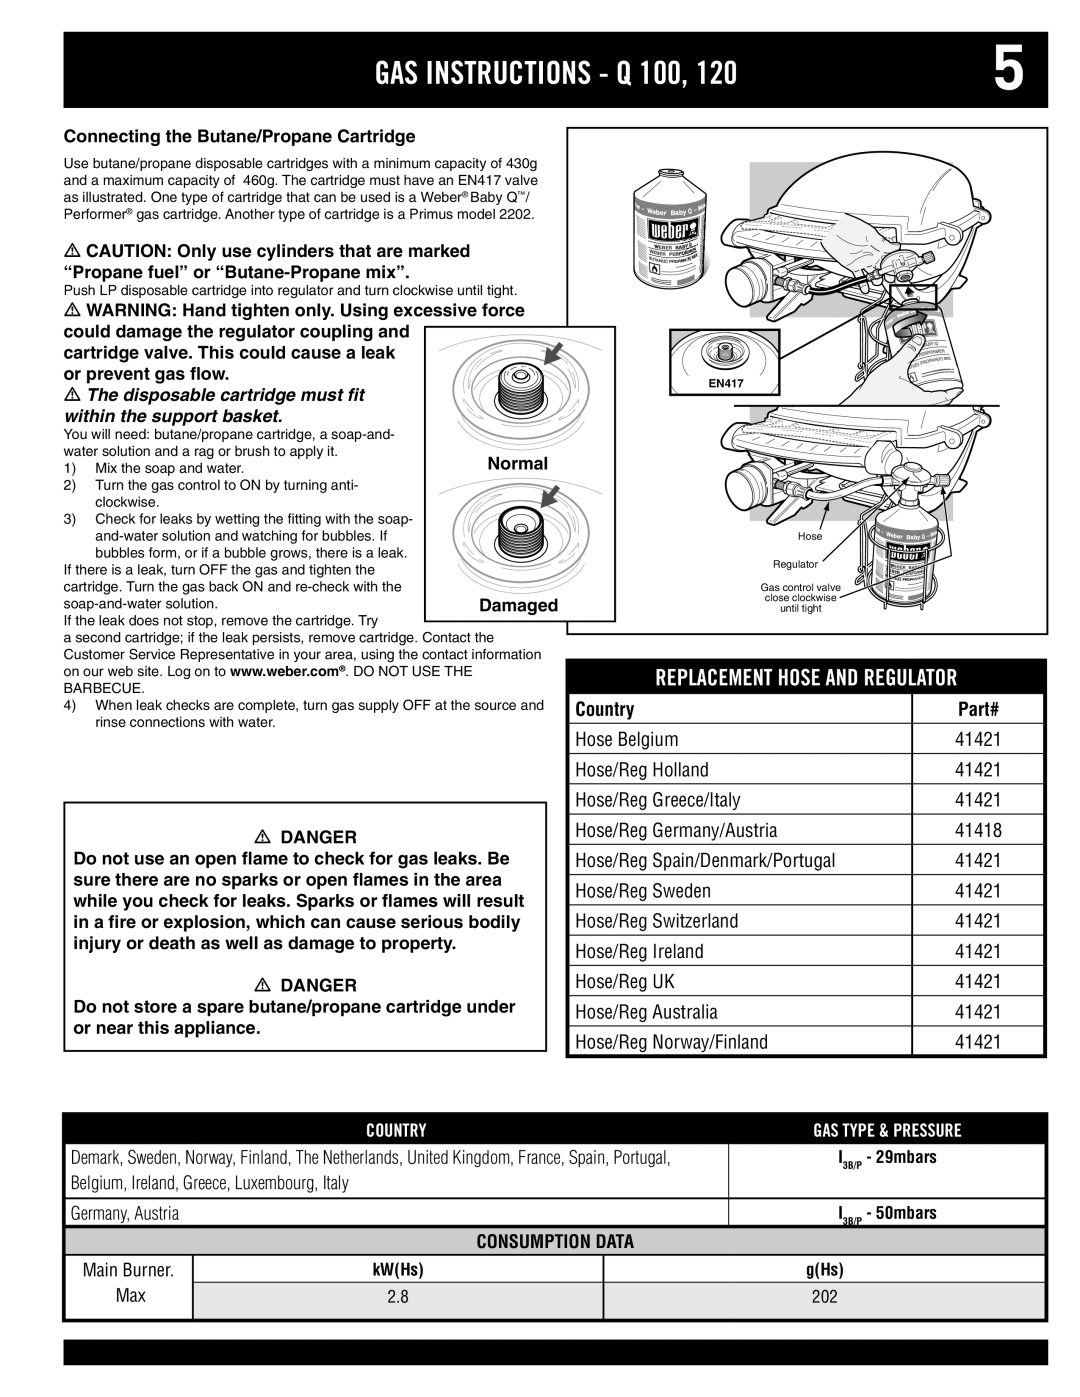 Weber 220, 100, 200, 120 owner manual Replacement Hose and Regulator, Gas Instructions - Q, Country, Consumption Data 